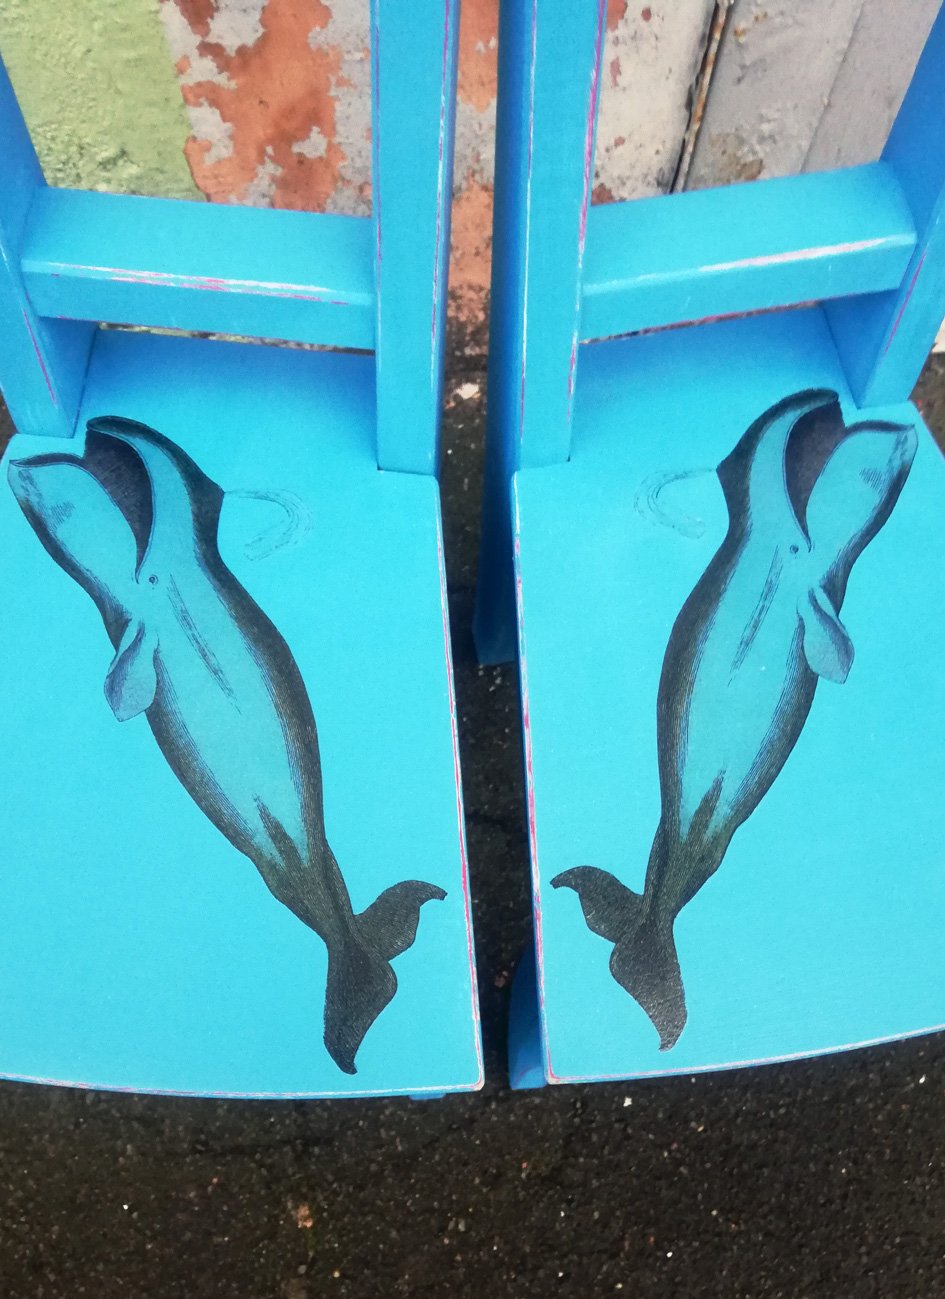 Pair of super cute painted children's chairs with Whale design